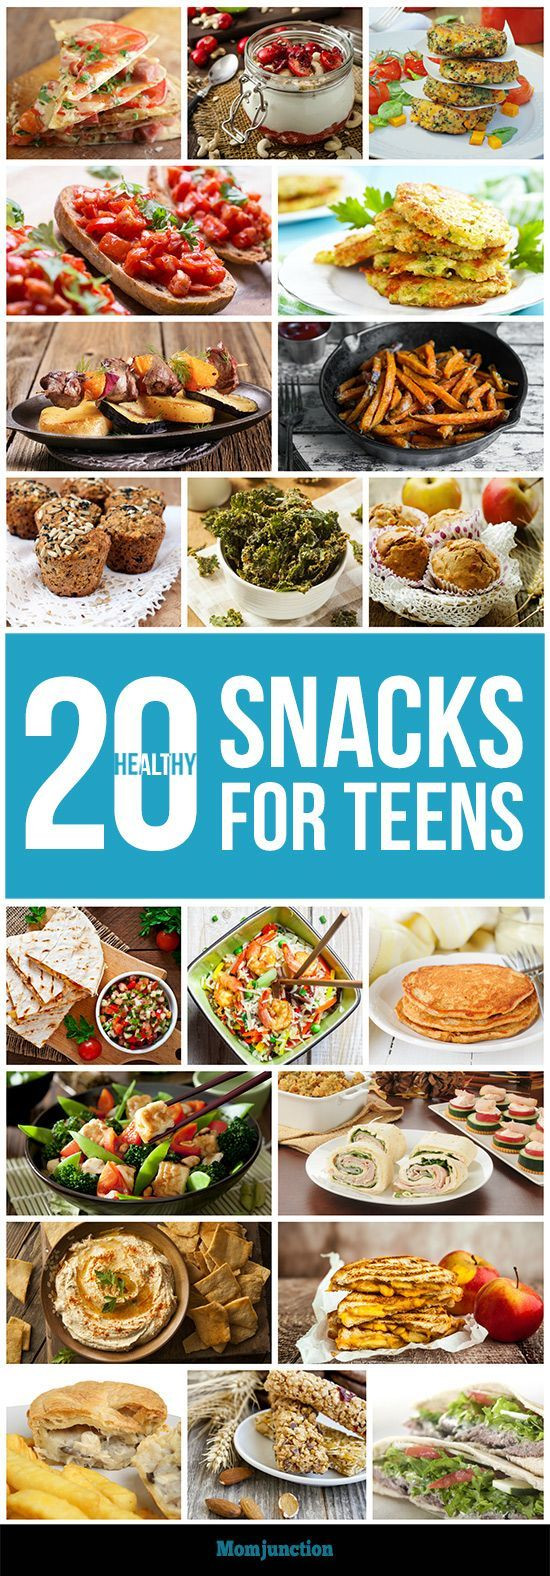 Healthy Snacks For Teens
 20 Easy And Healthy Snacks For Teens